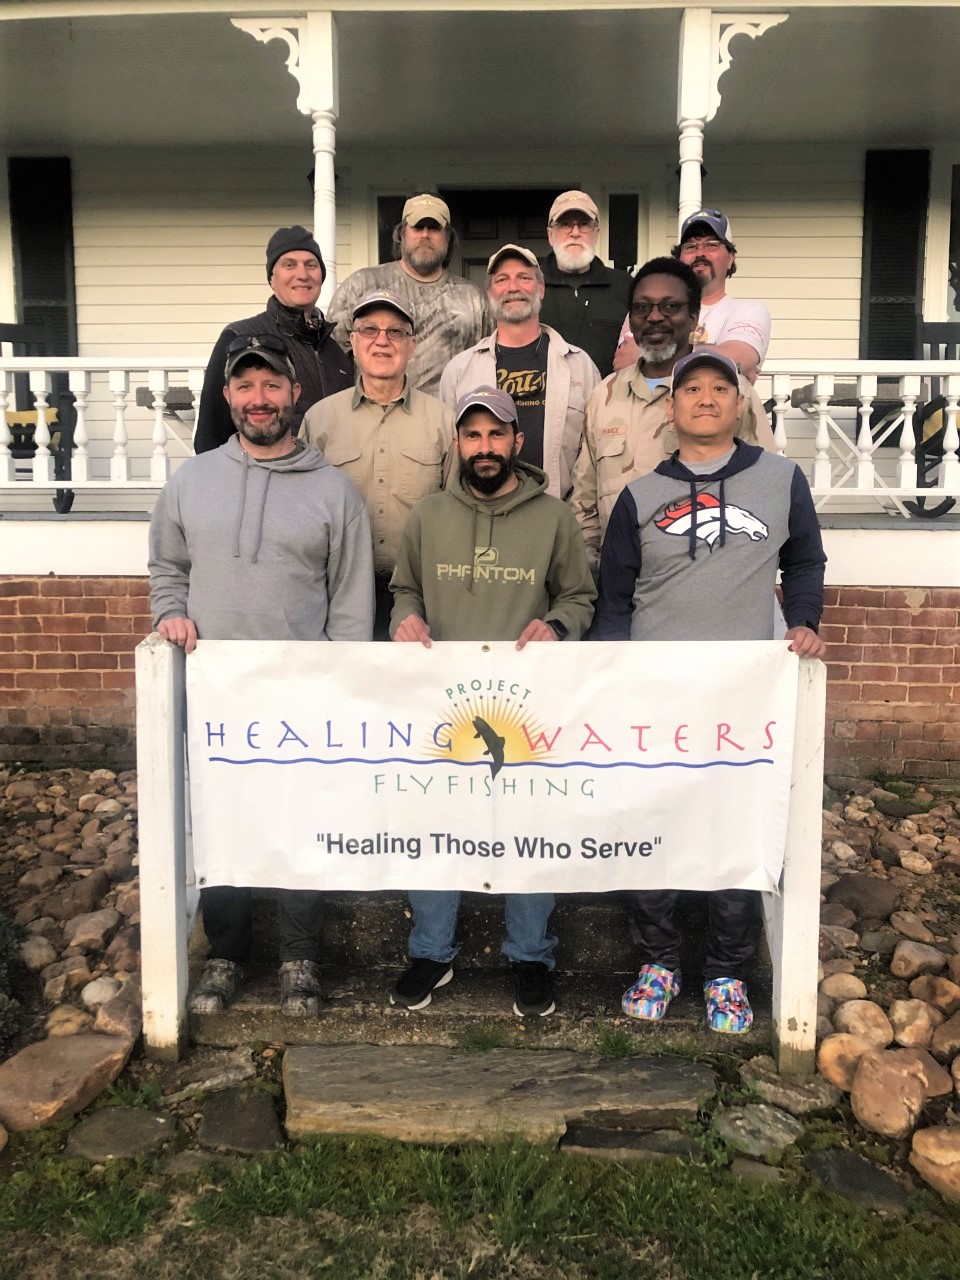 Project Healing Waters Fly Fishing